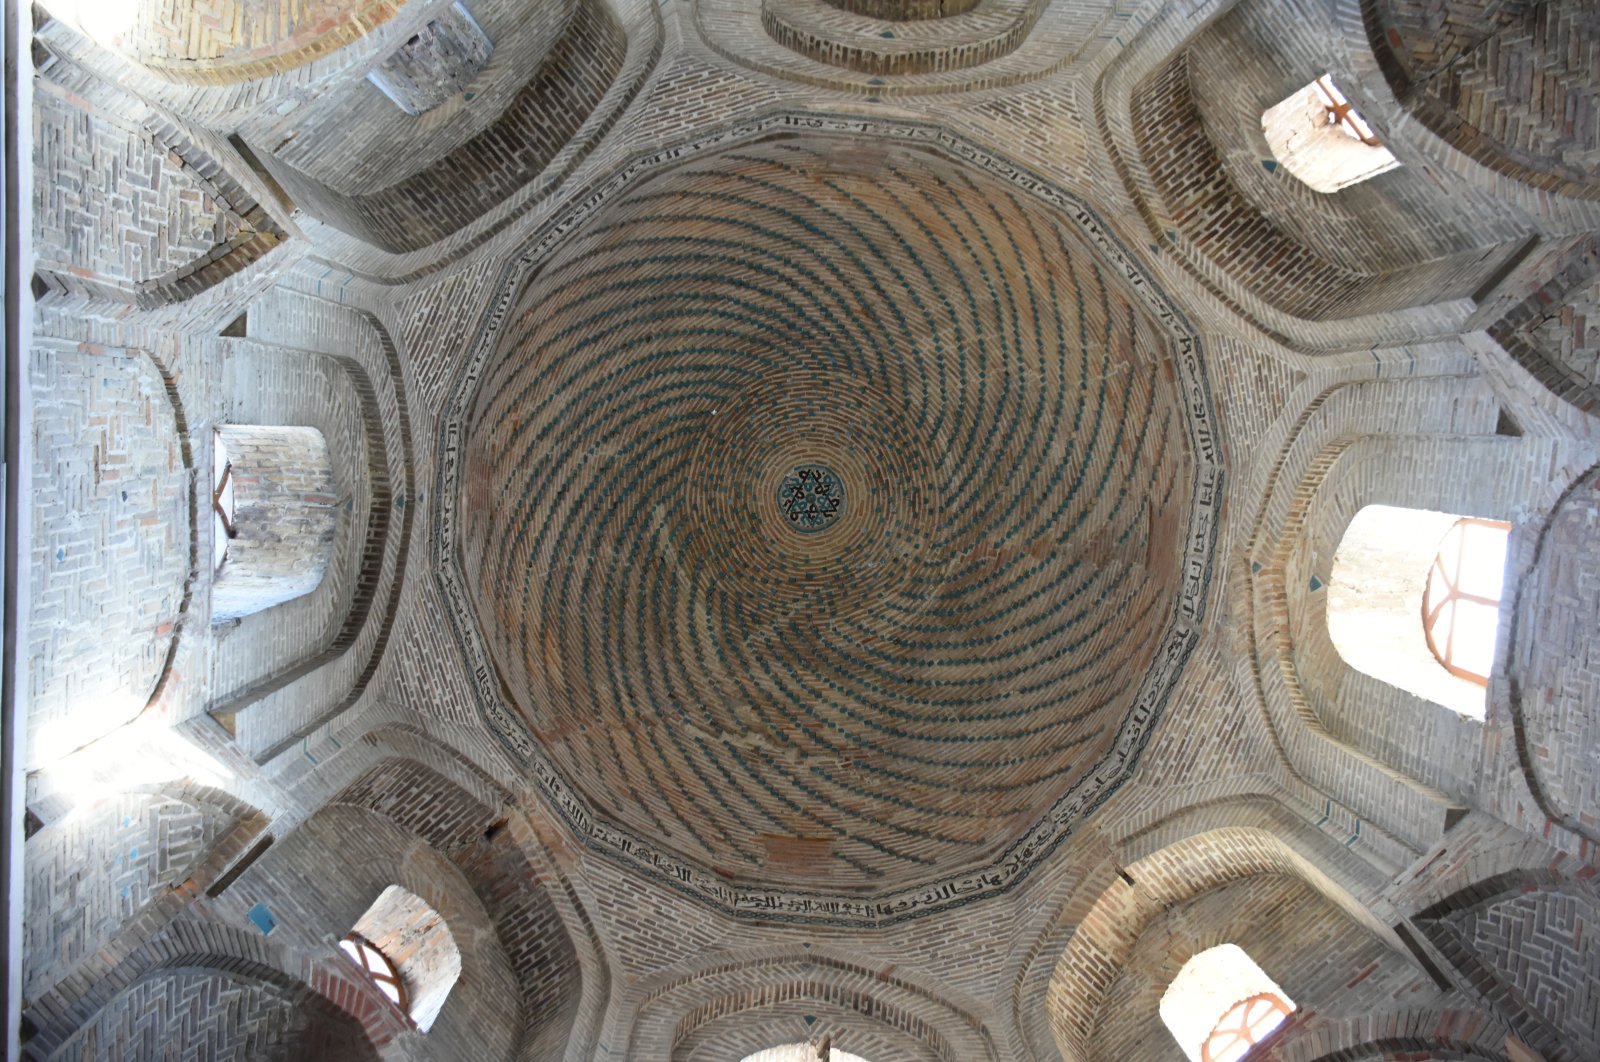 A photo showing the intricate ceiling of the Battalgazi Great Mosque located in Malatya, Turkey. (Photo by AA)